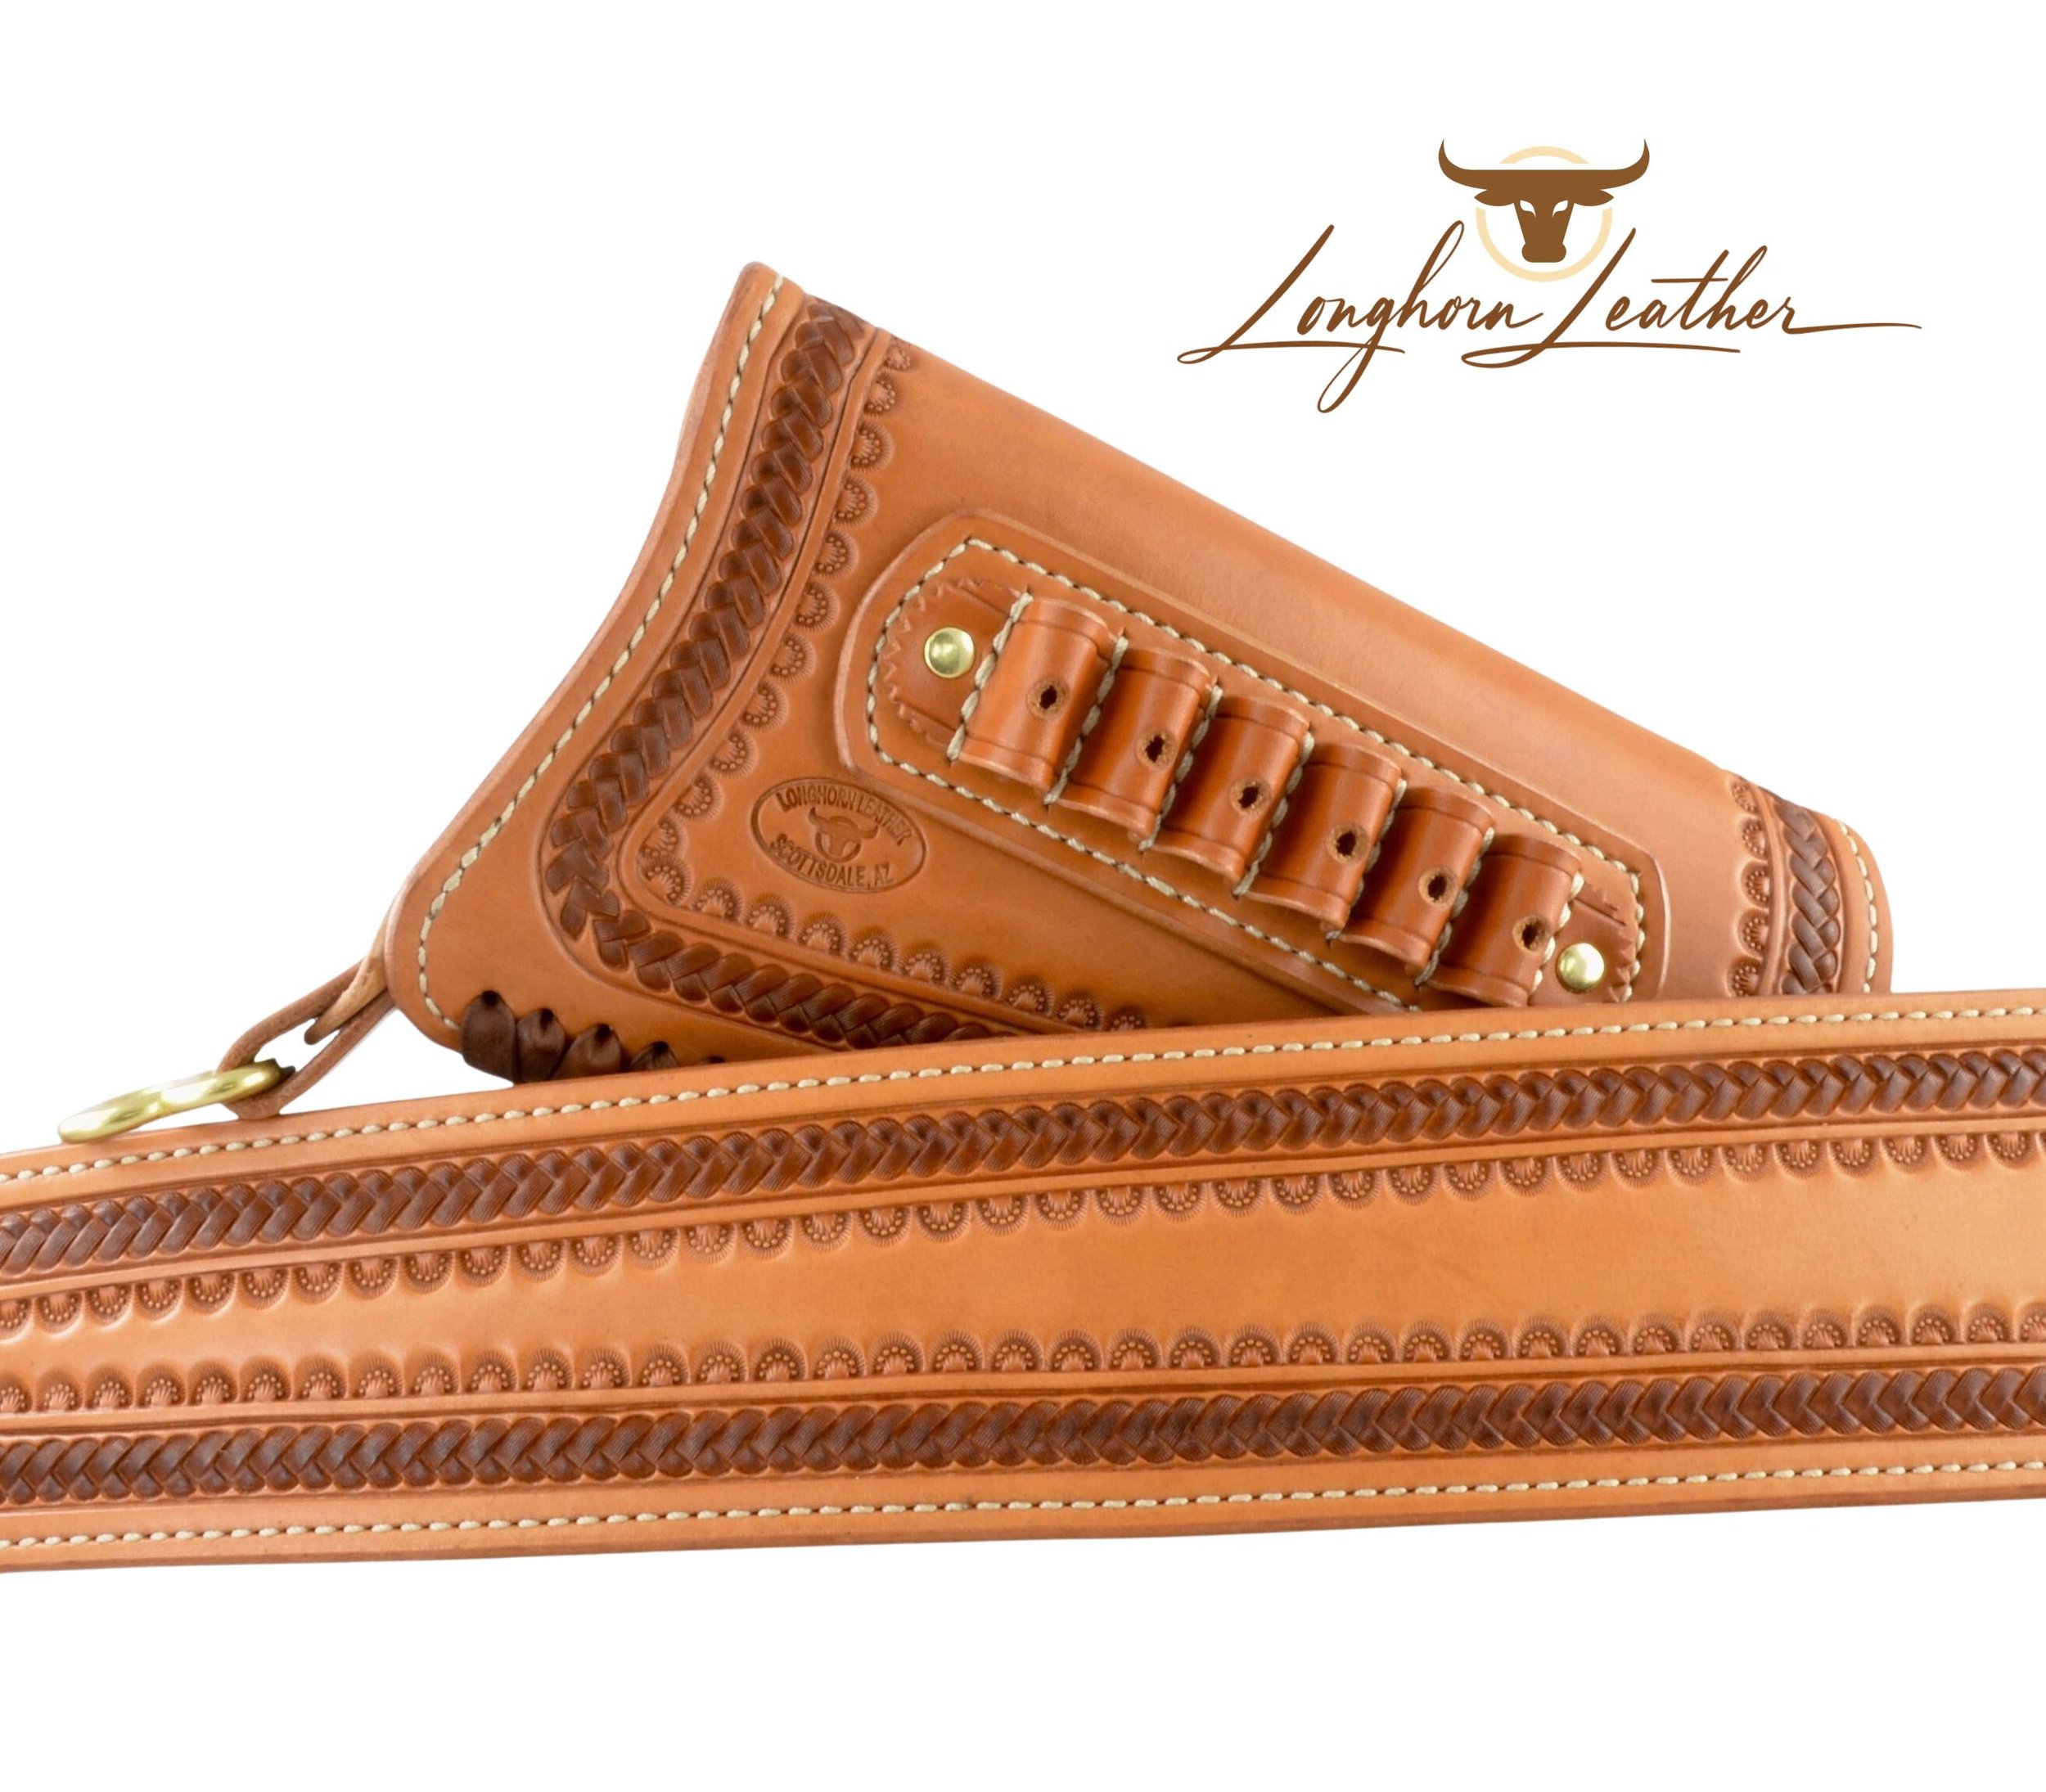 Custom leather gunstock cover and rifle sling featuring the Sedona design. Individually handcrafted at Longhorn Leather AZ